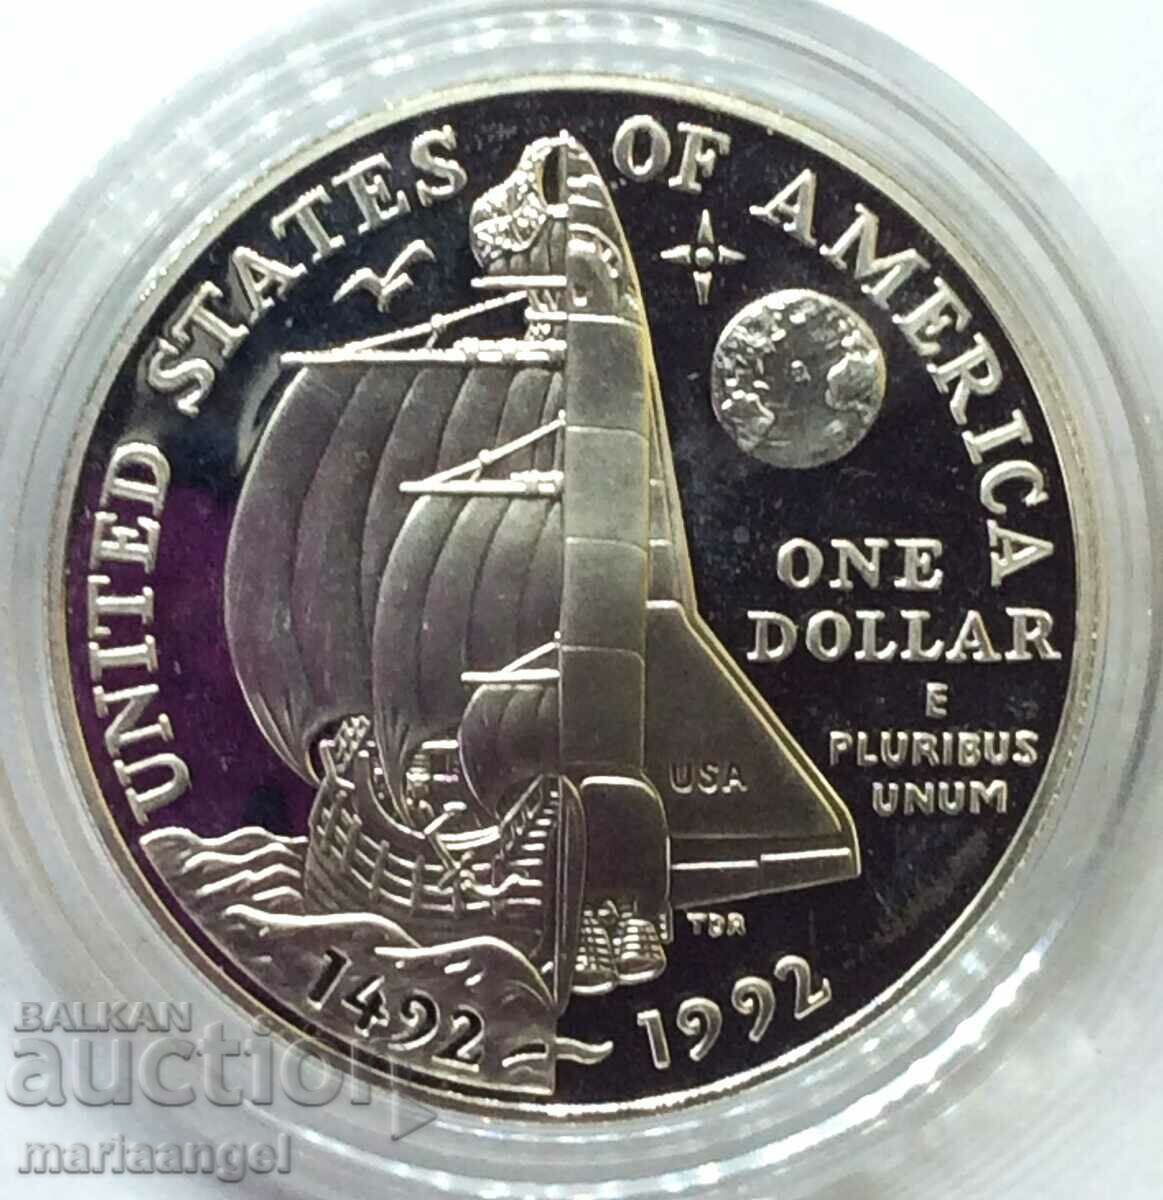 US $1 1992 Anniversary - 500 Years of Columbus UNC PROOF κάψουλα